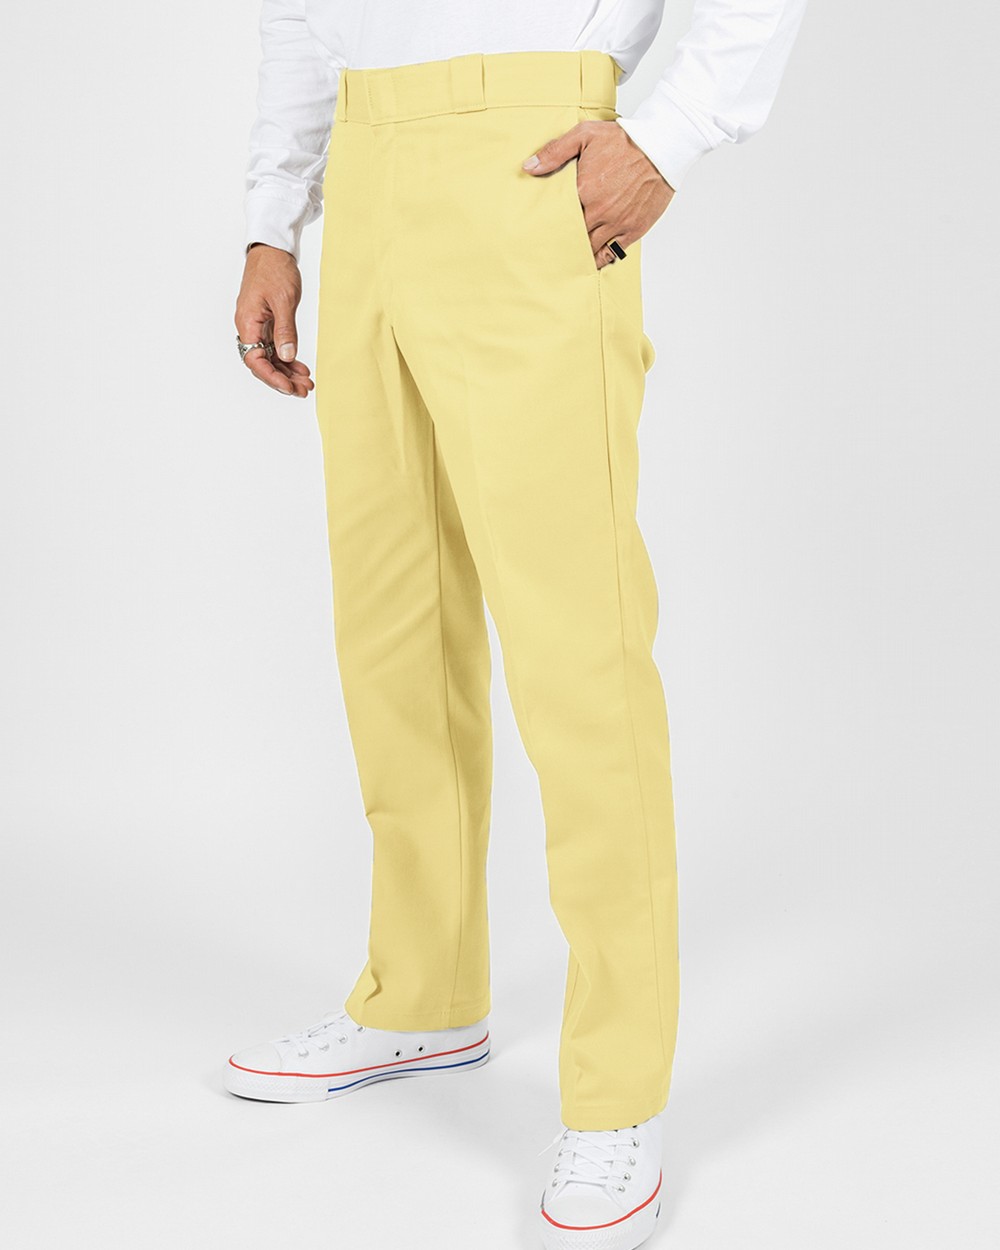 Buy Yellow Trousers For Men online in India